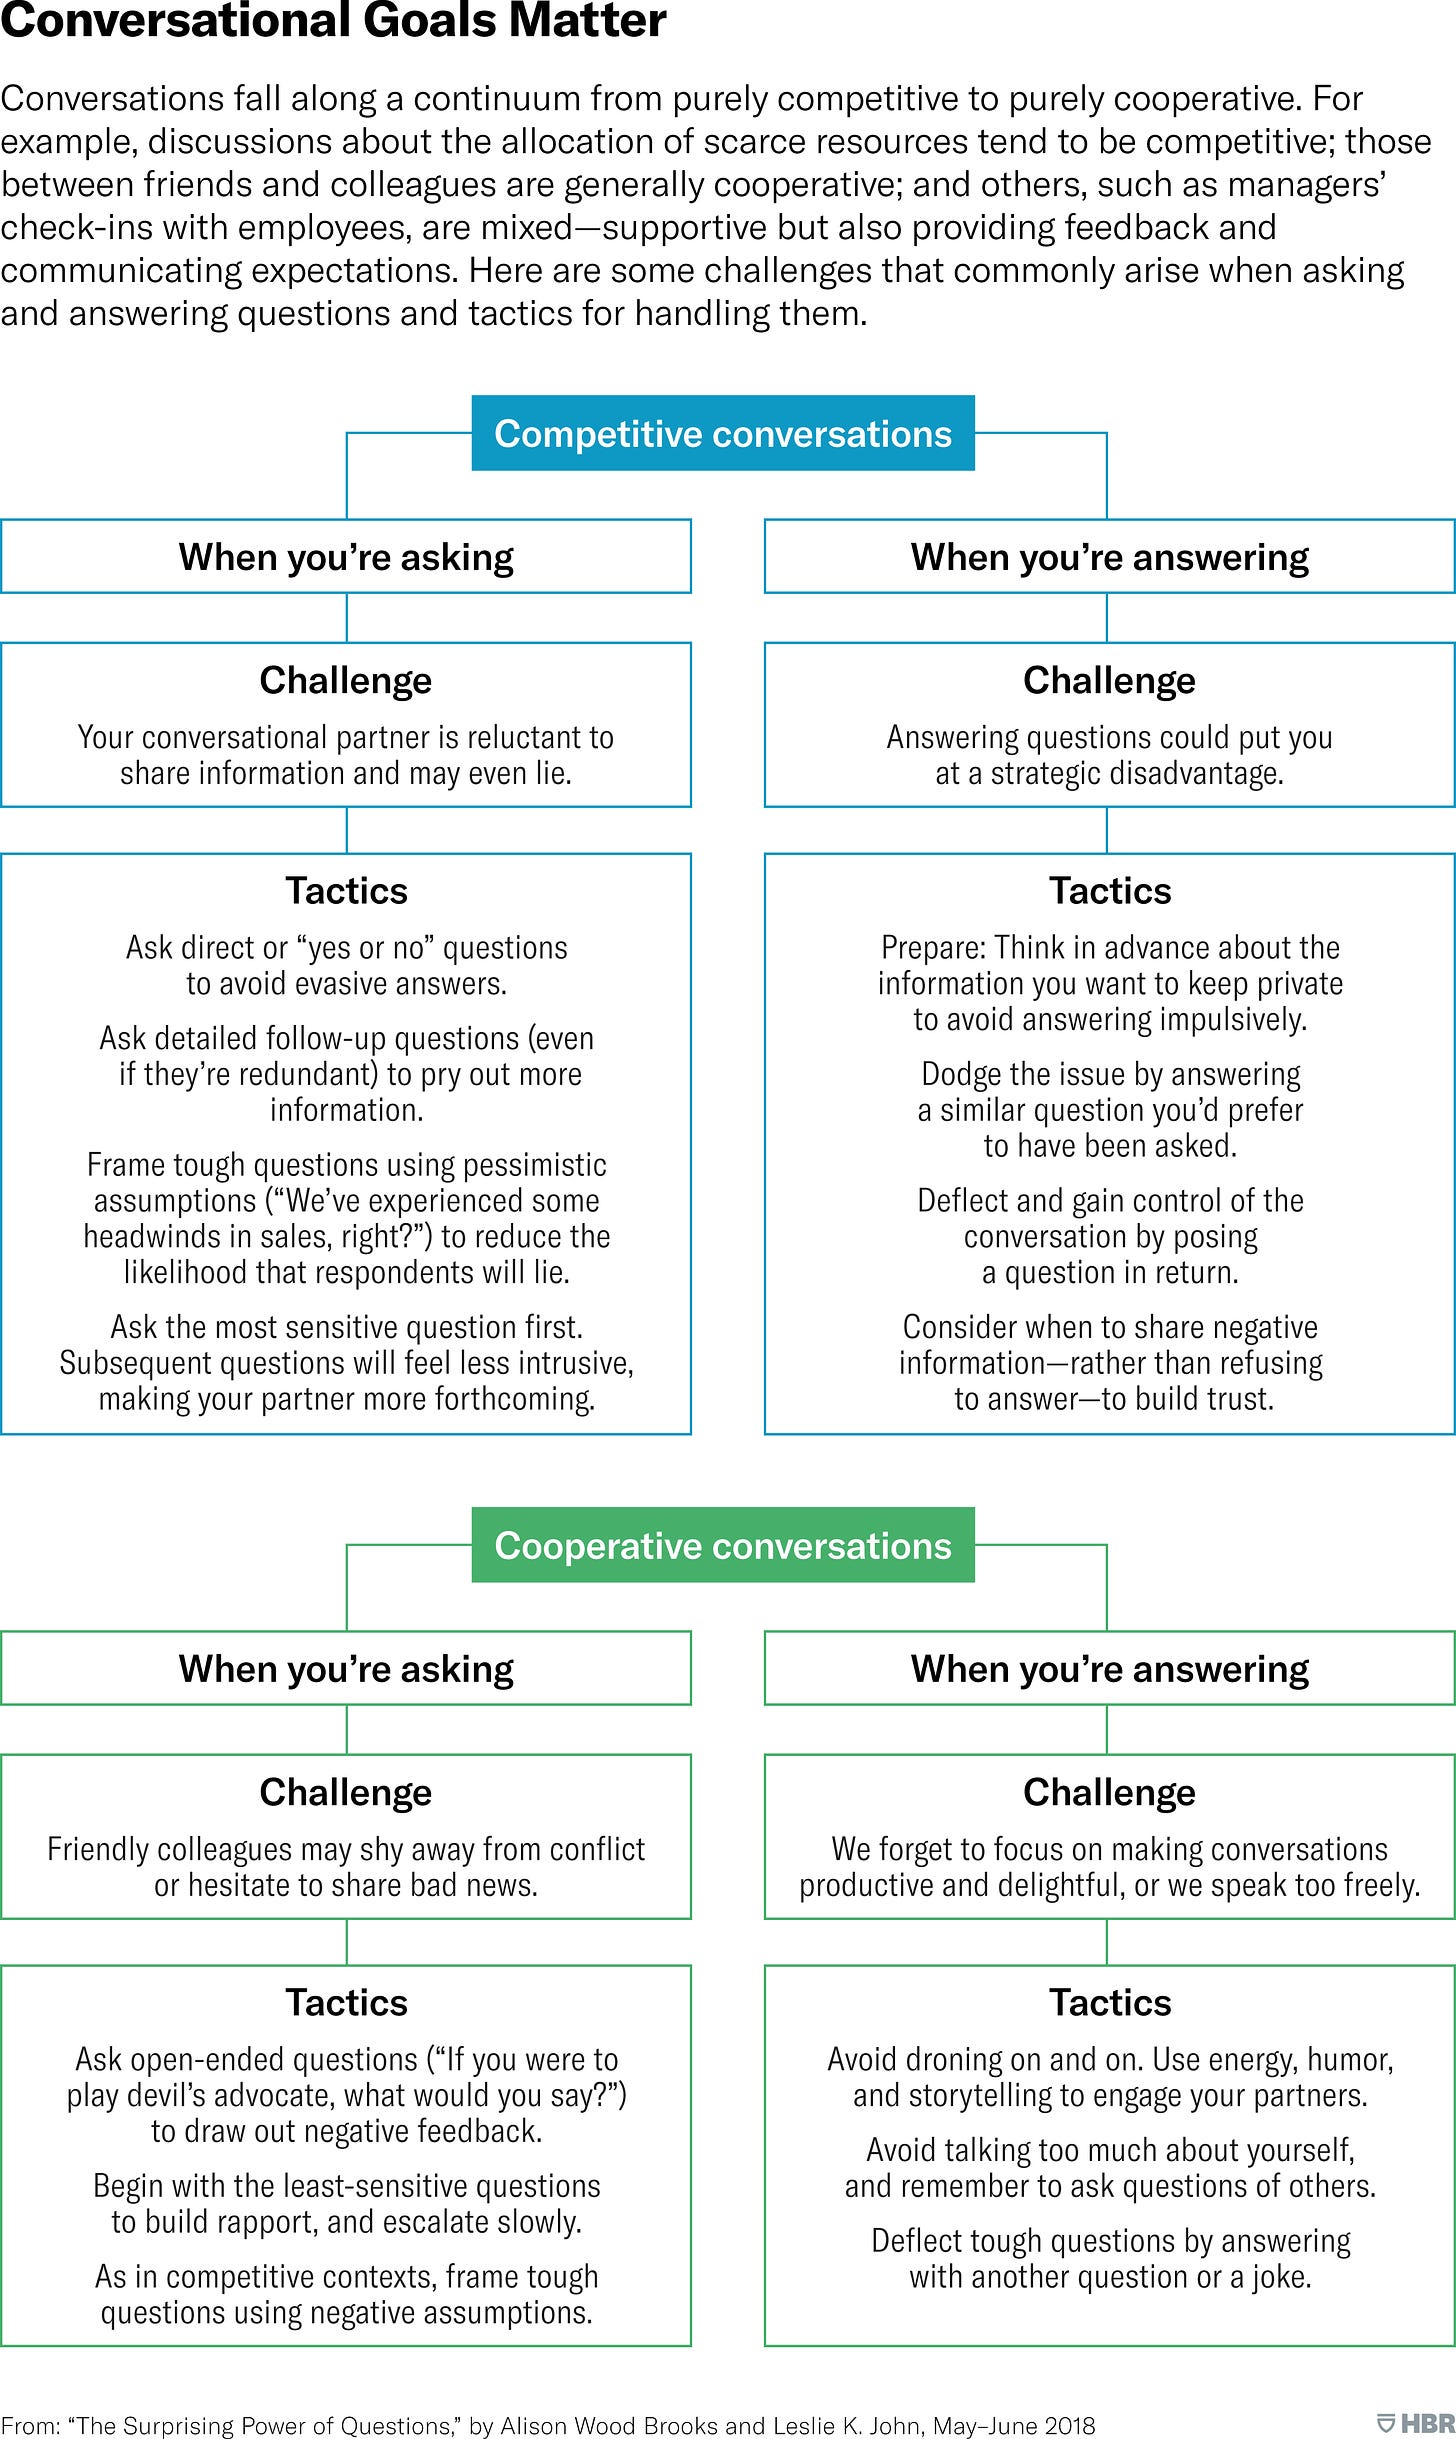 Conversational Goals Matter. Conversations fall along a continuum from purely competitive to purely cooperative. For example, discussions about the allocation of scarce resources tend to be competitive; those between friends and colleagues are generally cooperative; and others, such as managers’ check-ins with employees, are mixed, supportive but also providing feedback and communicating expectations. This chart presents some challenges that commonly arise when asking and answering questions, and tactics for handling them. For competitive conversations, a challenge faced when asking a question is that your conversational partner is reluctant to share information and may even lie. Tactics to address this include: Ask direct or yes-or-no questions to avoid evasive answers. Ask detailed follow-up questions, even if they’re redundant, to pry out more information. Frame tough questions using pessimistic assumptions, such as “We’ve experienced some headwinds in sales, right?” to reduce the likelihood that respondents will lie. Ask the most sensitive question first. Subsequent questions will feel less intrusive, making your partner more forthcoming. A challenge faced when answering a question within a competitive conversation is that Answering questions could put you at a strategic disadvantage. Tactics to address this include: Prepare: Think in advance about the information you want to keep private to avoid answering impulsively. Dodge the issue by answering a similar question you’d prefer to have been asked. Deflect and gain control of the conversation by posing a question in return. Consider when to share negative information, rather than refusing to answer, to build trust. For cooperative conversations, a challenge faced when asking a question is that friendly colleagues may shy away from conflict or hesitate to share bad news. Tactics to address this include: Ask open-ended questions, like “If you were to play devil’s advocate, what would you say?” to draw out negative feedback. Begin with the least-sensitive questions to build rapporr, and escalate slowly. As in competitive contexts, frame tough questions using negative assumptions. A challenge faced when answering a question within a cooperative conversation is that we forget to focus on making conversations productive and delightful, or we speak too freely. Tactics to address this include: Avoid droning on and on. Use energy humor and storytelling to engage your partners. Avoid talking too much about yourself, and remember to ask questions of others. Deflect tough questions by answering with another question or a joke.